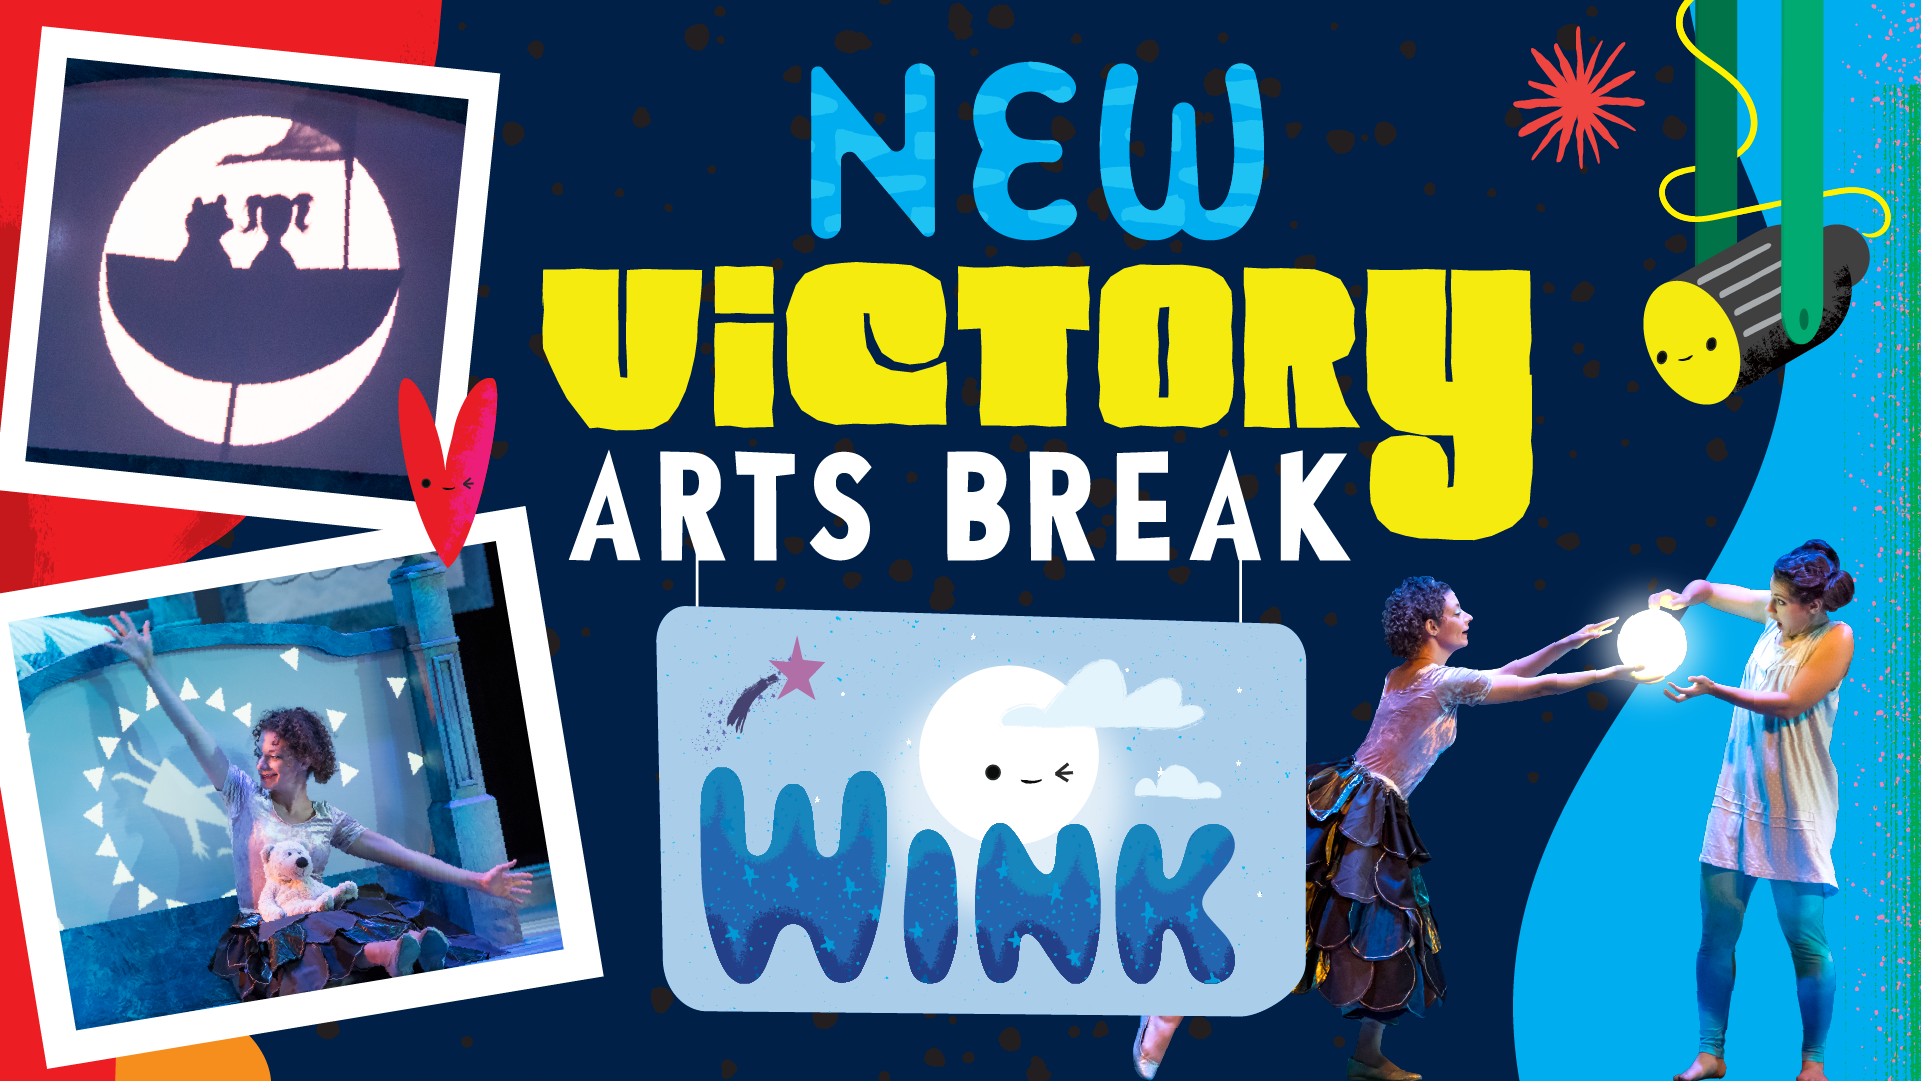 New Victory Arts Break: Wink, surrounded by photos of shadow puppetry and performance